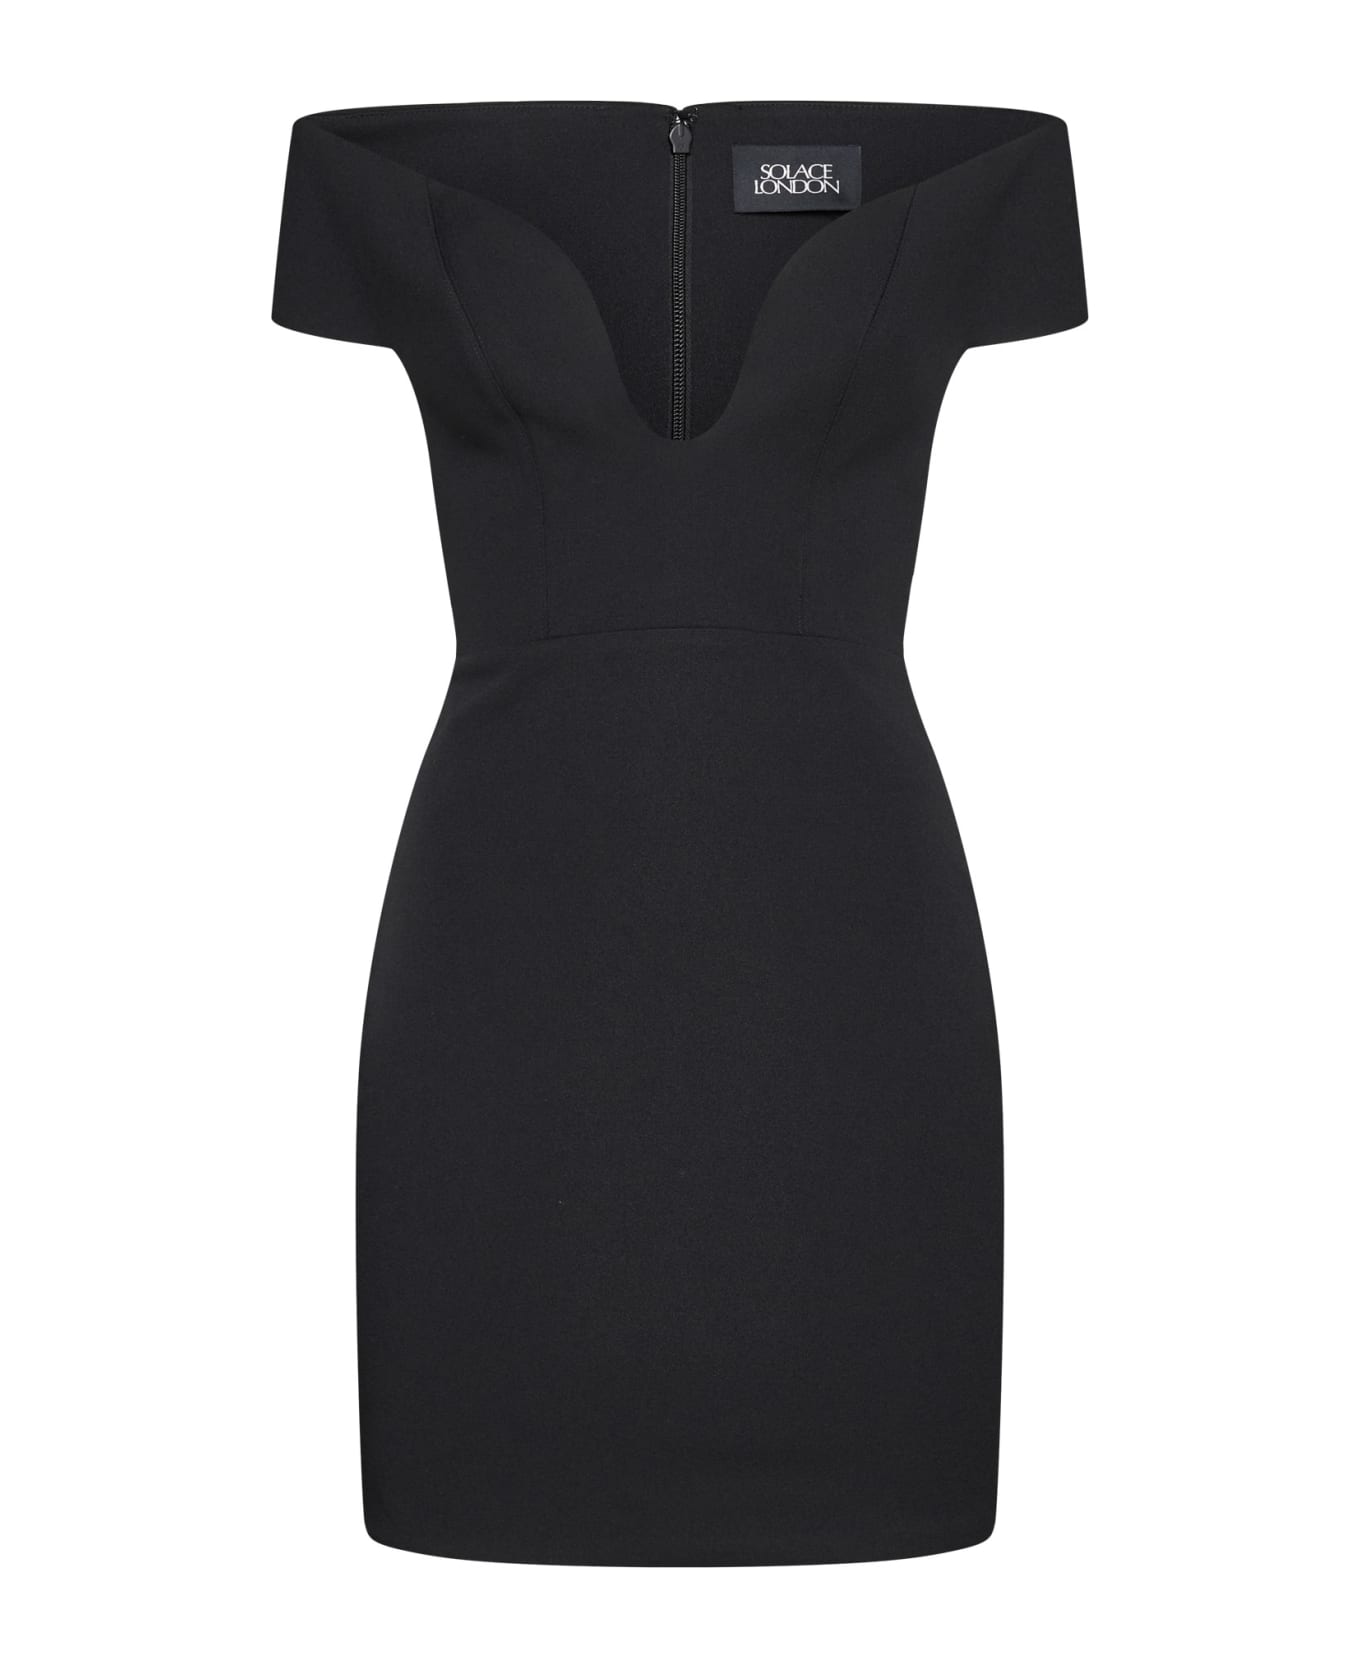 Solace London 'lola' Mini Black Dress With Plunging Sweetheart Neckline In Stretch Crepe Woman Solace London - Black